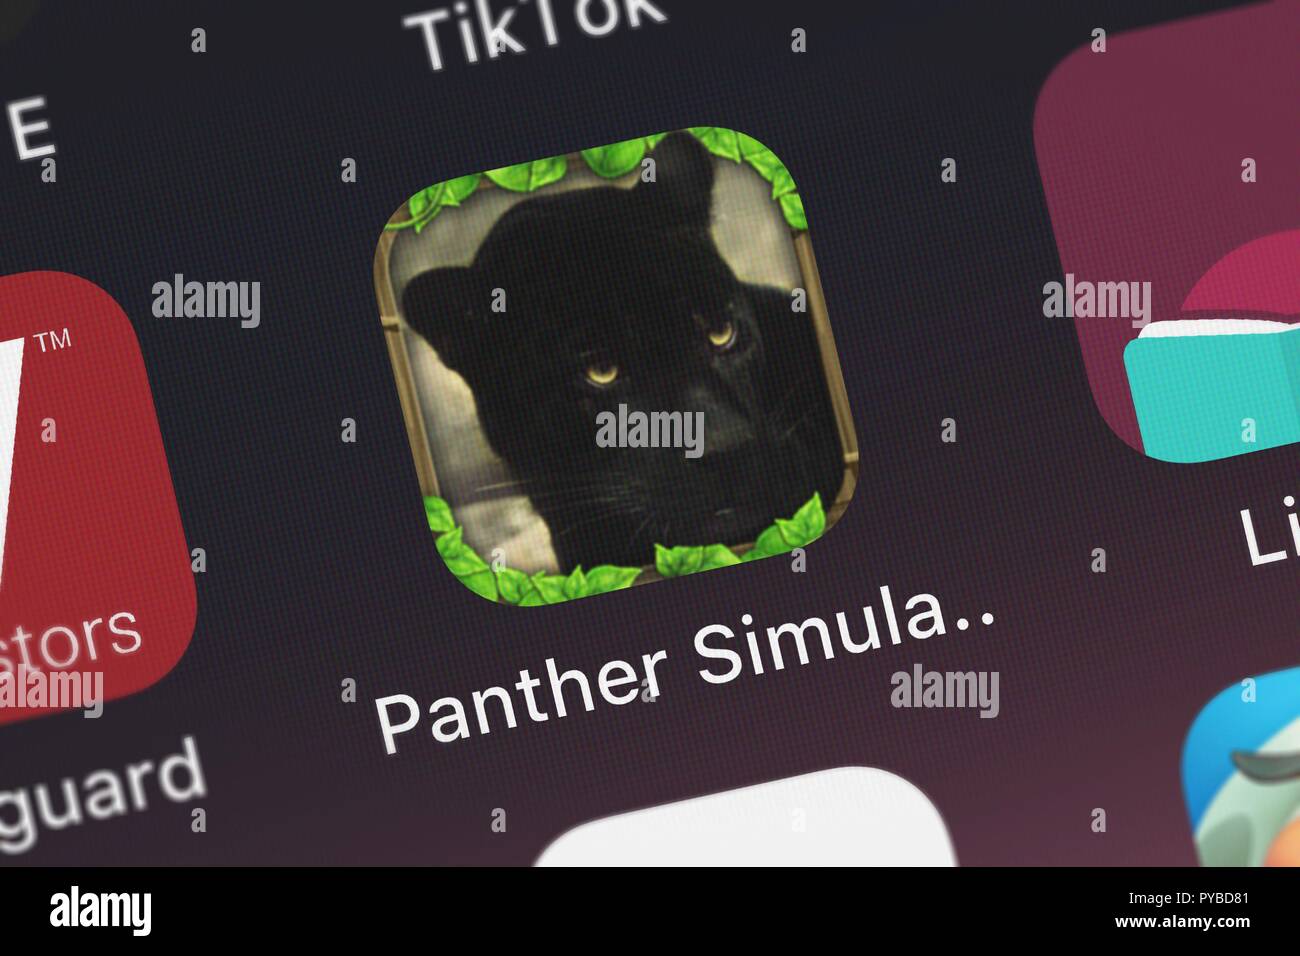 London, United Kingdom - October 26, 2018: Screenshot of the mobile app Panther Simulator from Gluten Free Games. Stock Photo